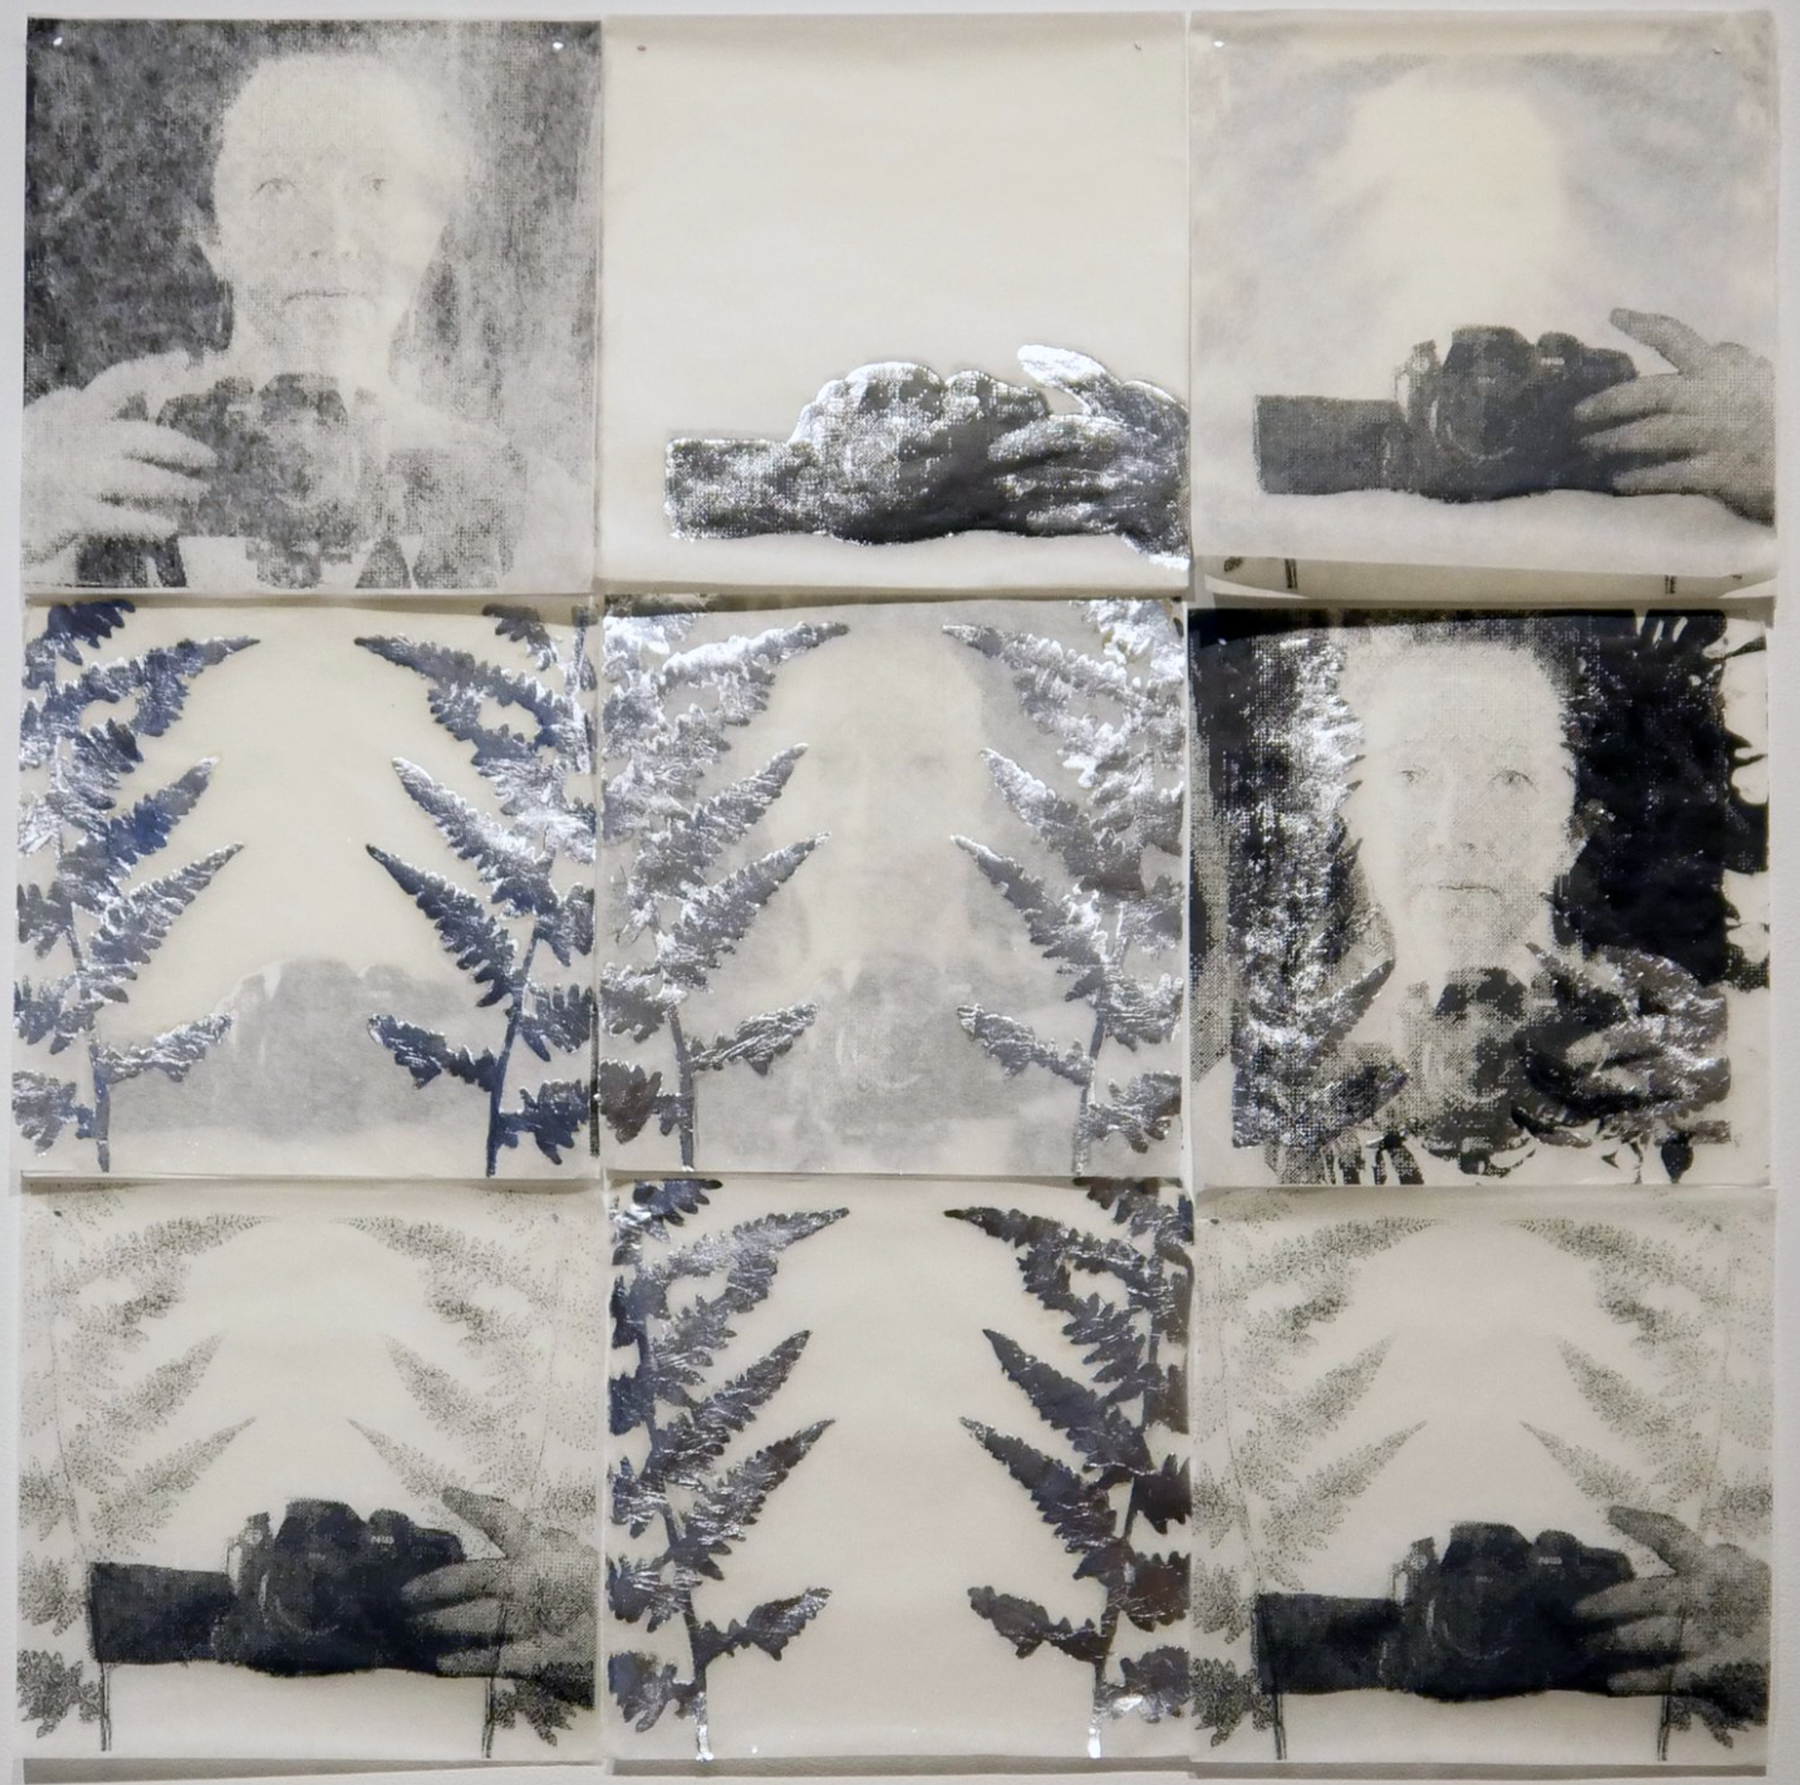 A grid of nine silkscreen prints of imagery including a camera, a woman, and ferns.